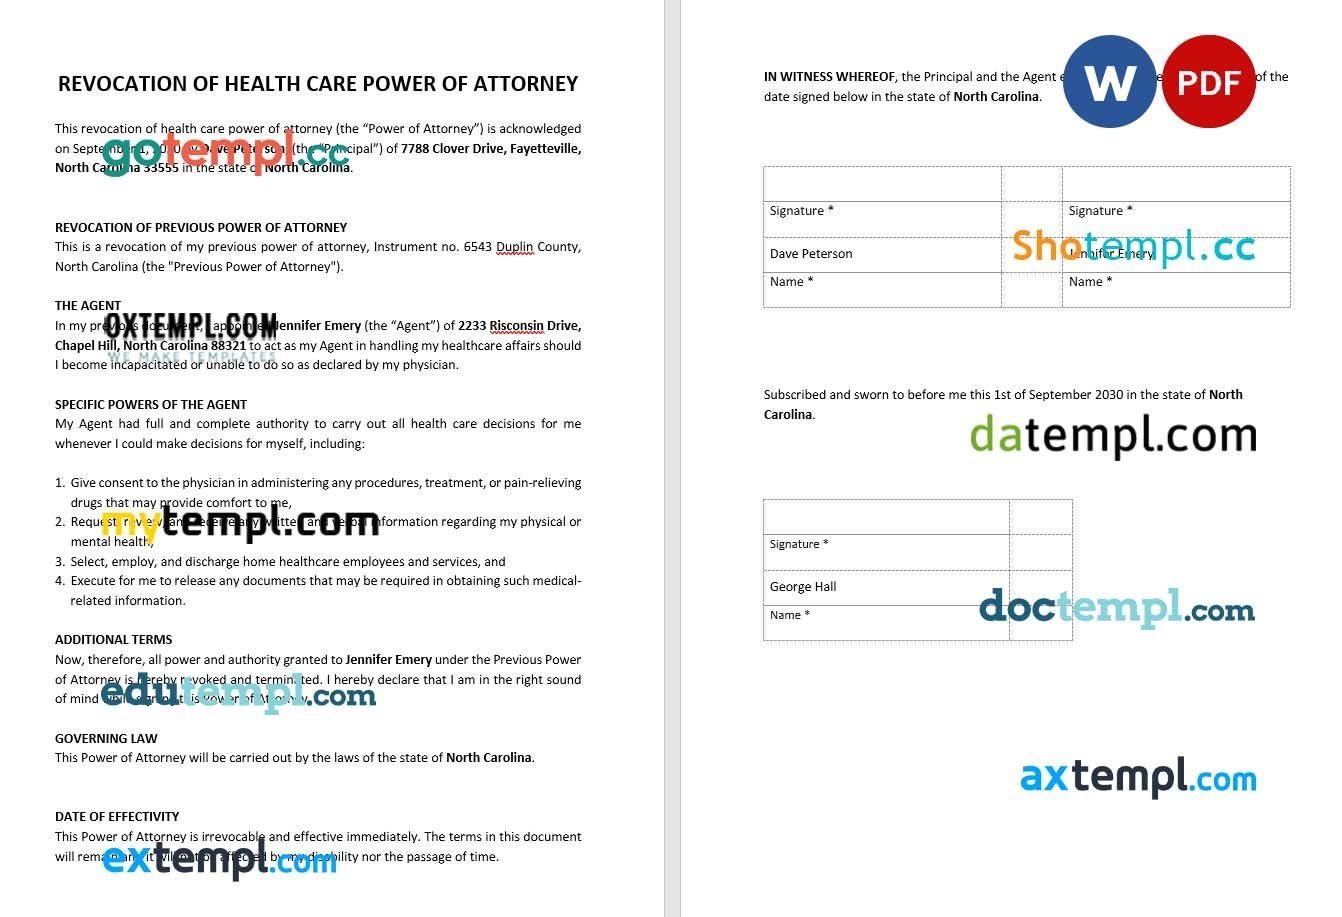 Revocation of Health Care Power of Attorney example, fully editable